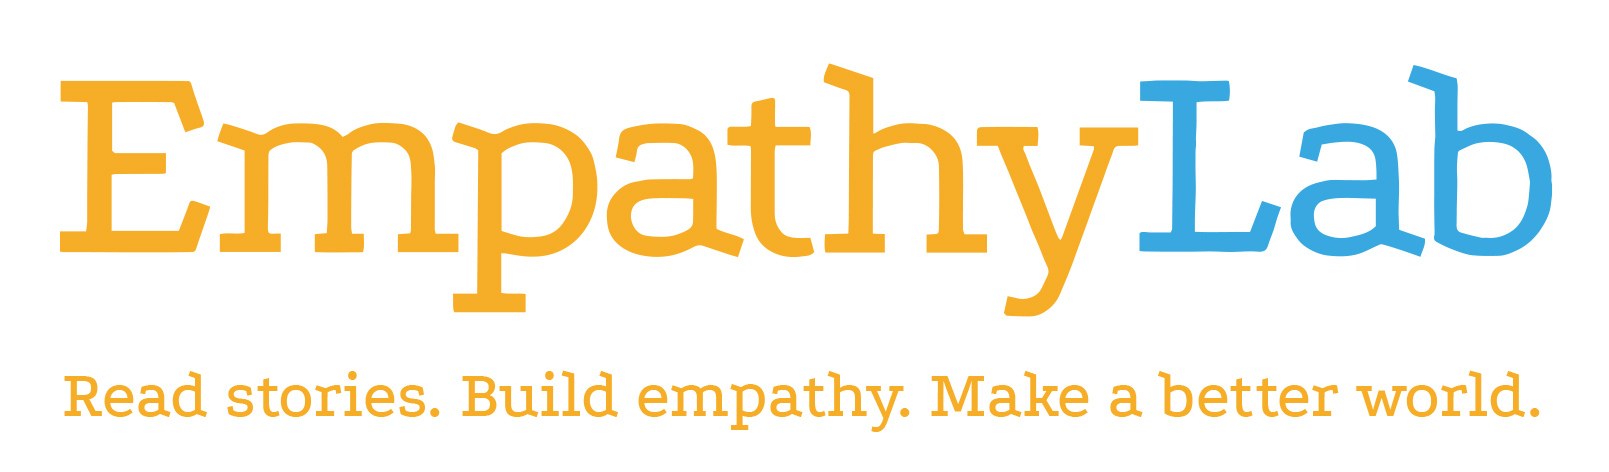 Secondary Read for Empathy Collection 2022